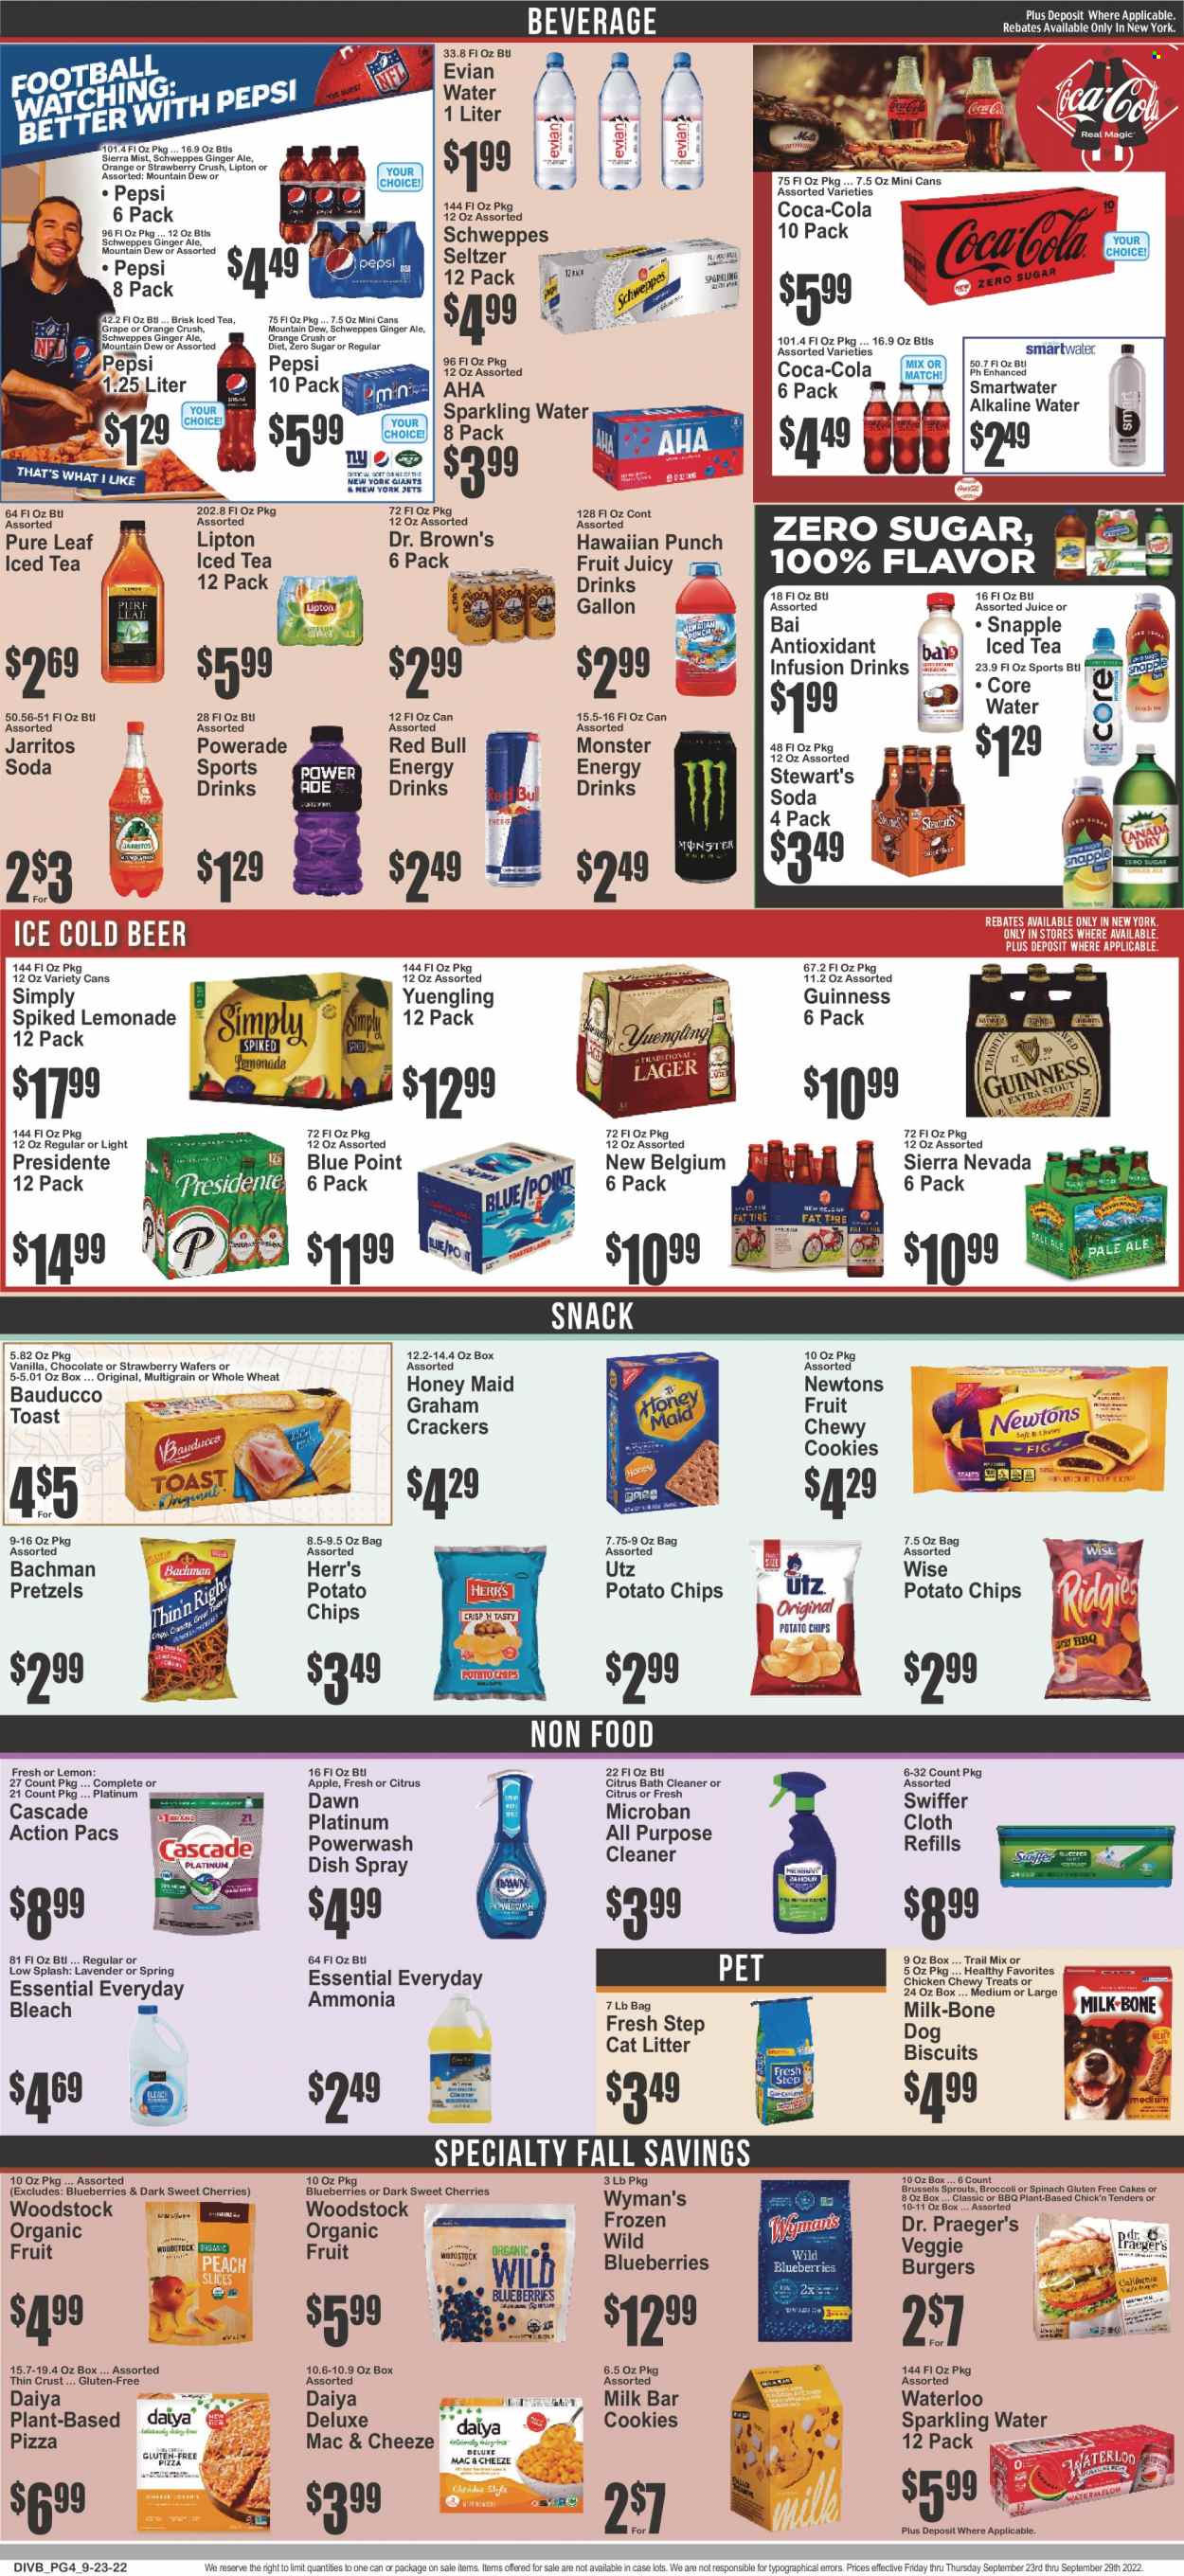 thumbnail - Super Fresh Flyer - 09/23/2022 - 09/29/2022 - Sales products - pretzels, cake, broccoli, brussel sprouts, blueberries, oranges, pizza, veggie burger, cookies, graham crackers, wafers, chocolate, snack, crackers, milky bar, potato chips, Honey Maid, trail mix, Coca-Cola, ginger ale, lemonade, Mountain Dew, Schweppes, Powerade, Pepsi, juice, energy drink, Monster, Lipton, ice tea, Red Bull, Monster Energy, Snapple, Dr. Brown's, Sierra Mist, Bai, seltzer water, soda, sparkling water, Smartwater, alkaline water, Evian, Pure Leaf, beer, Guinness, cleaner, bleach, all purpose cleaner, Swiffer, Cascade, Yuengling. Page 4.